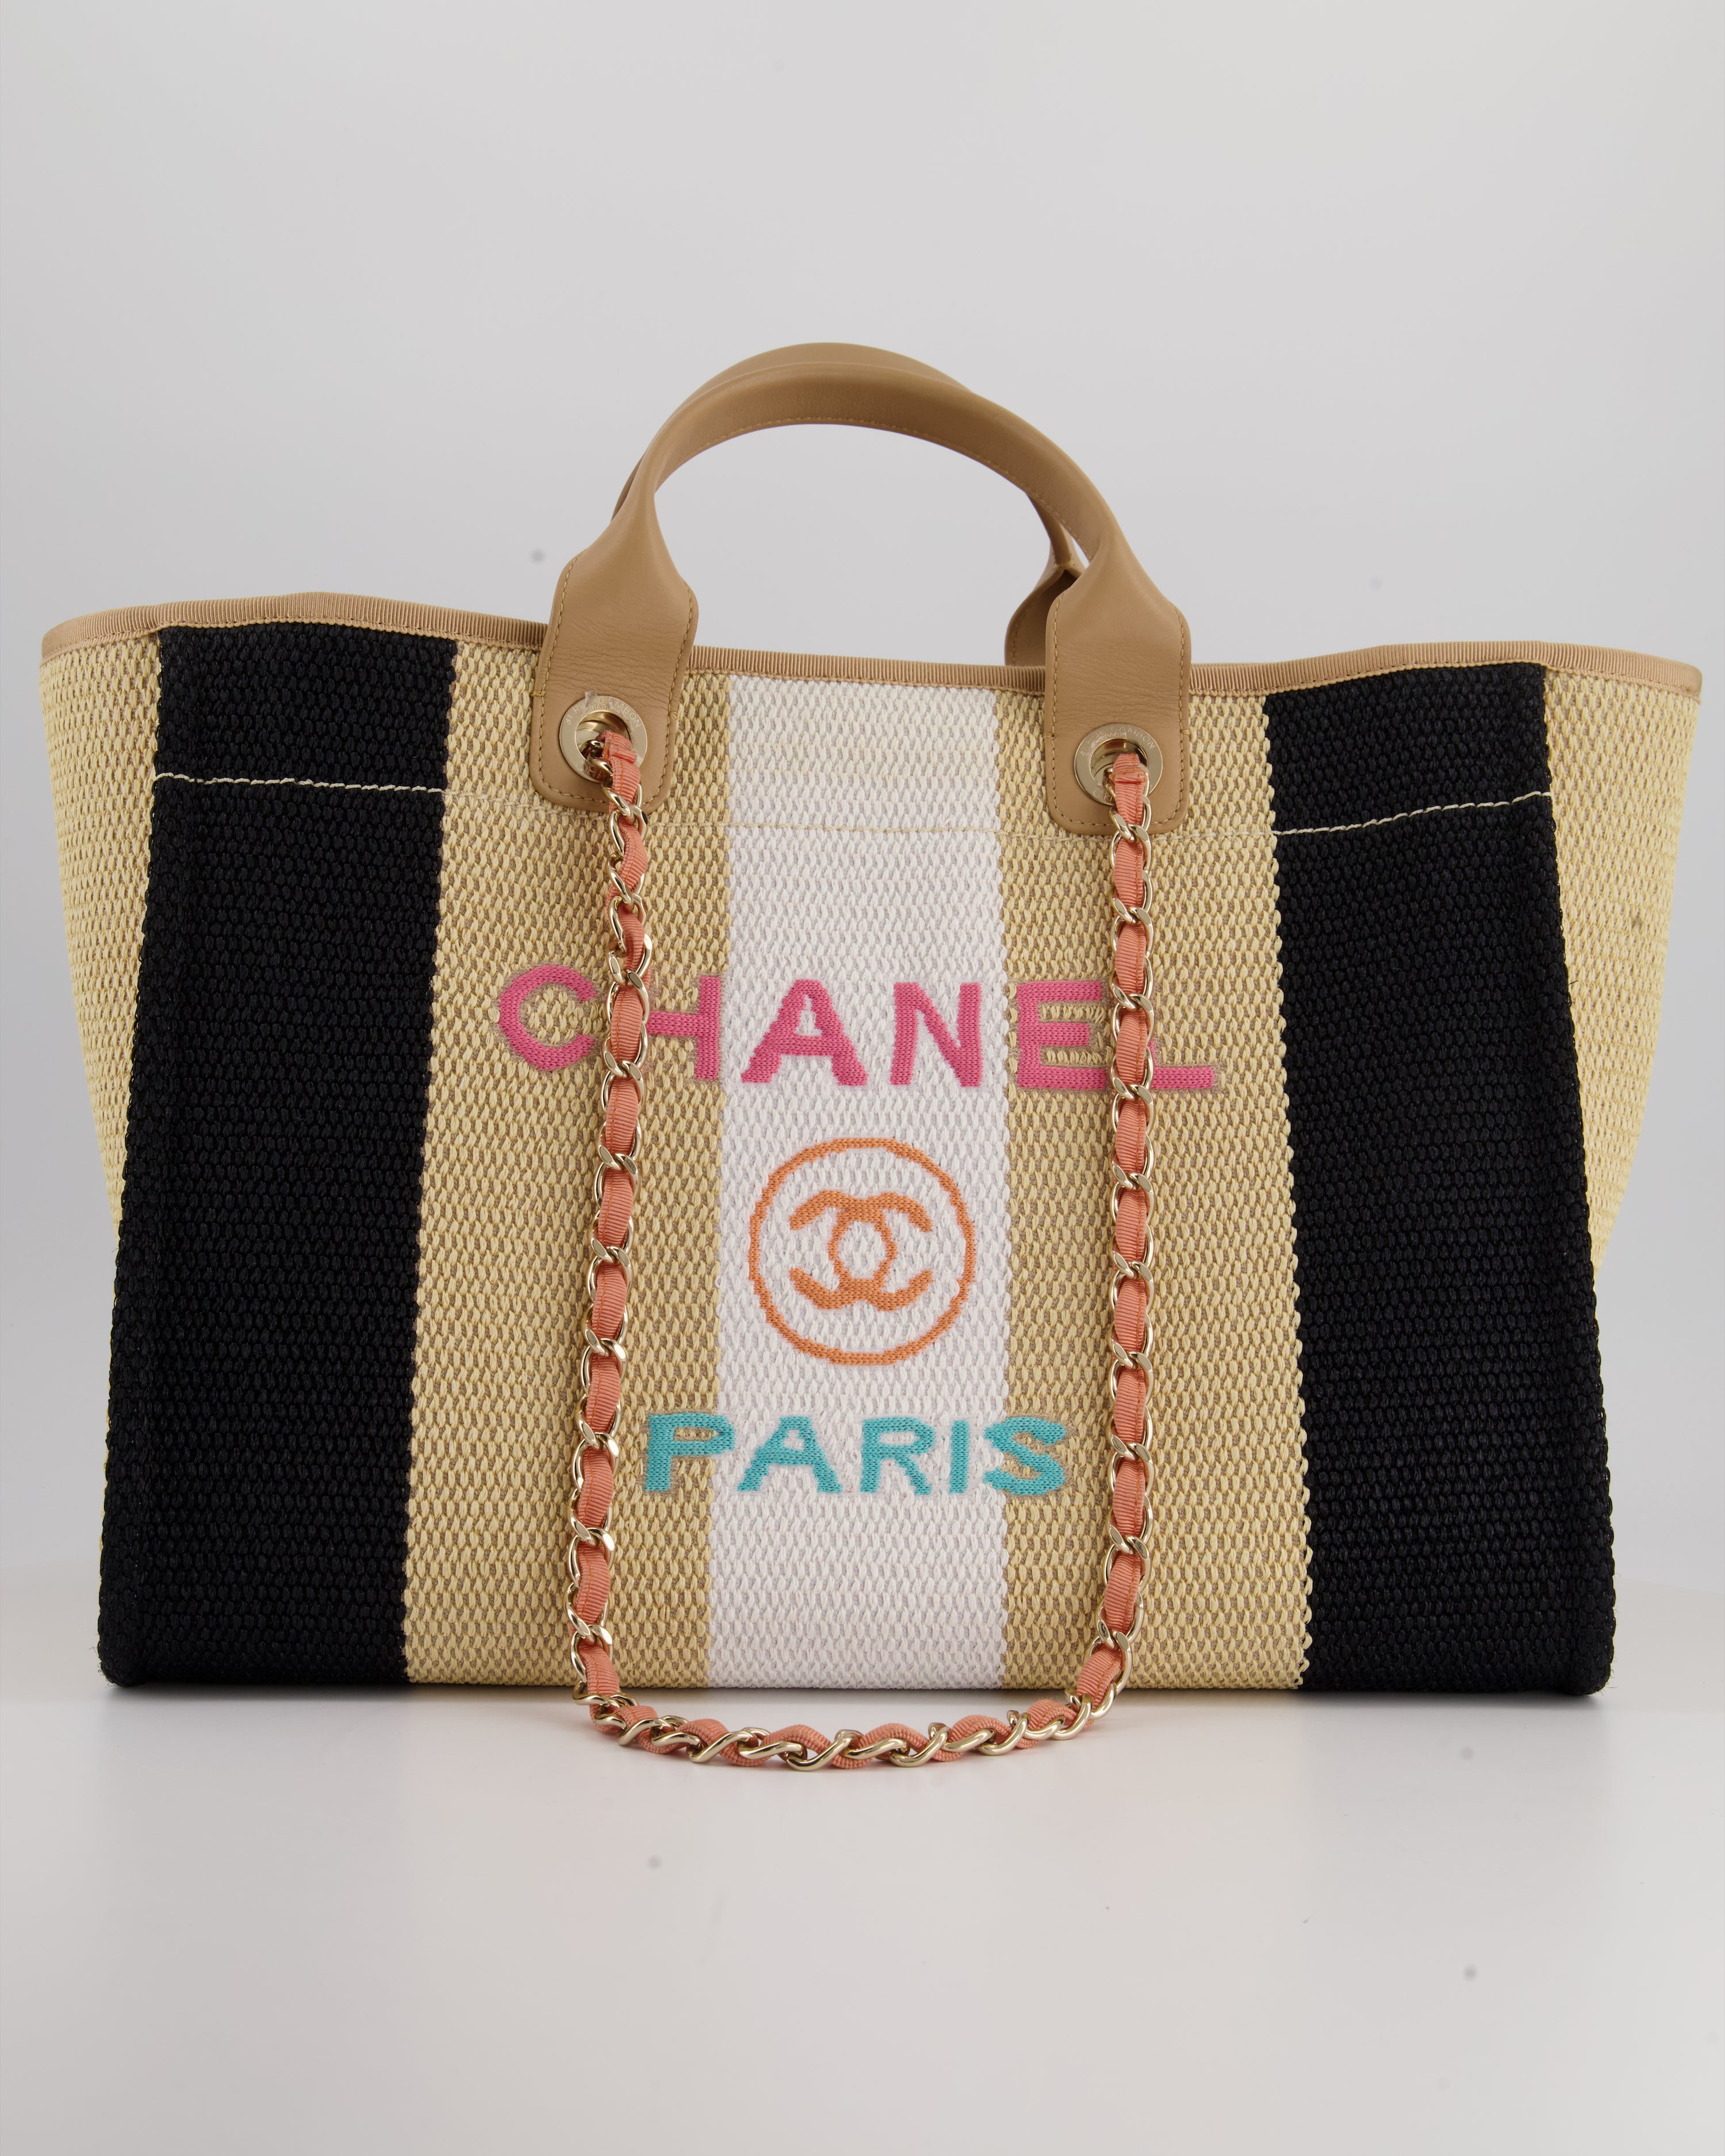 HOT* Chanel Beige, Black and White Raffia Deauville Tote Bag with Pas –  Sellier